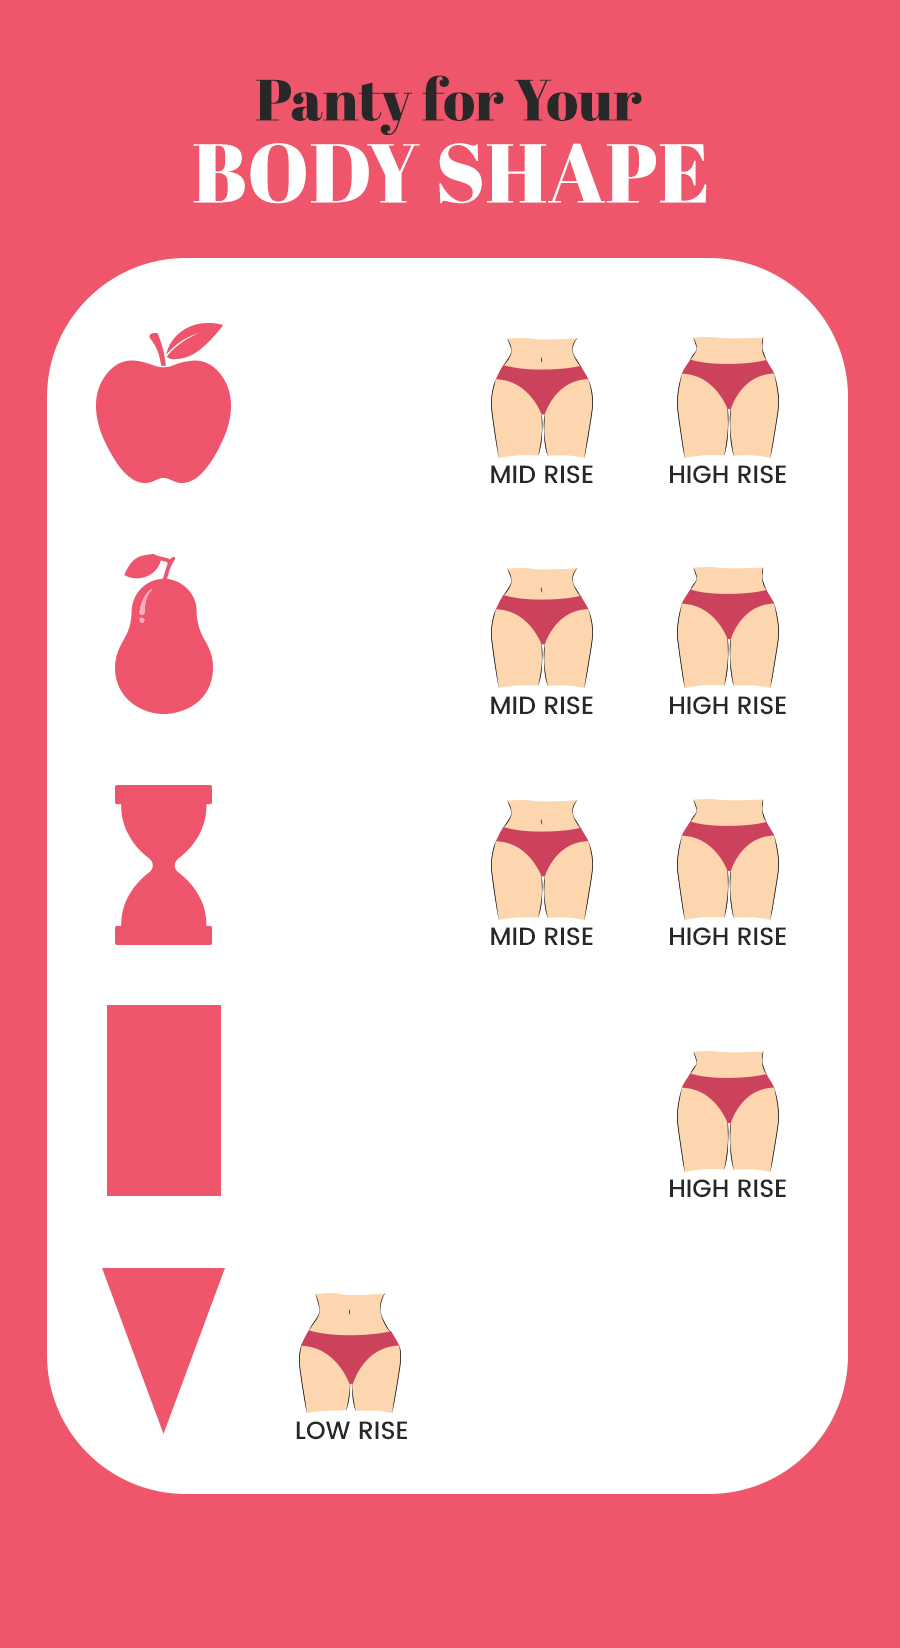 Select Your Panty Style Based on Your Body Shape